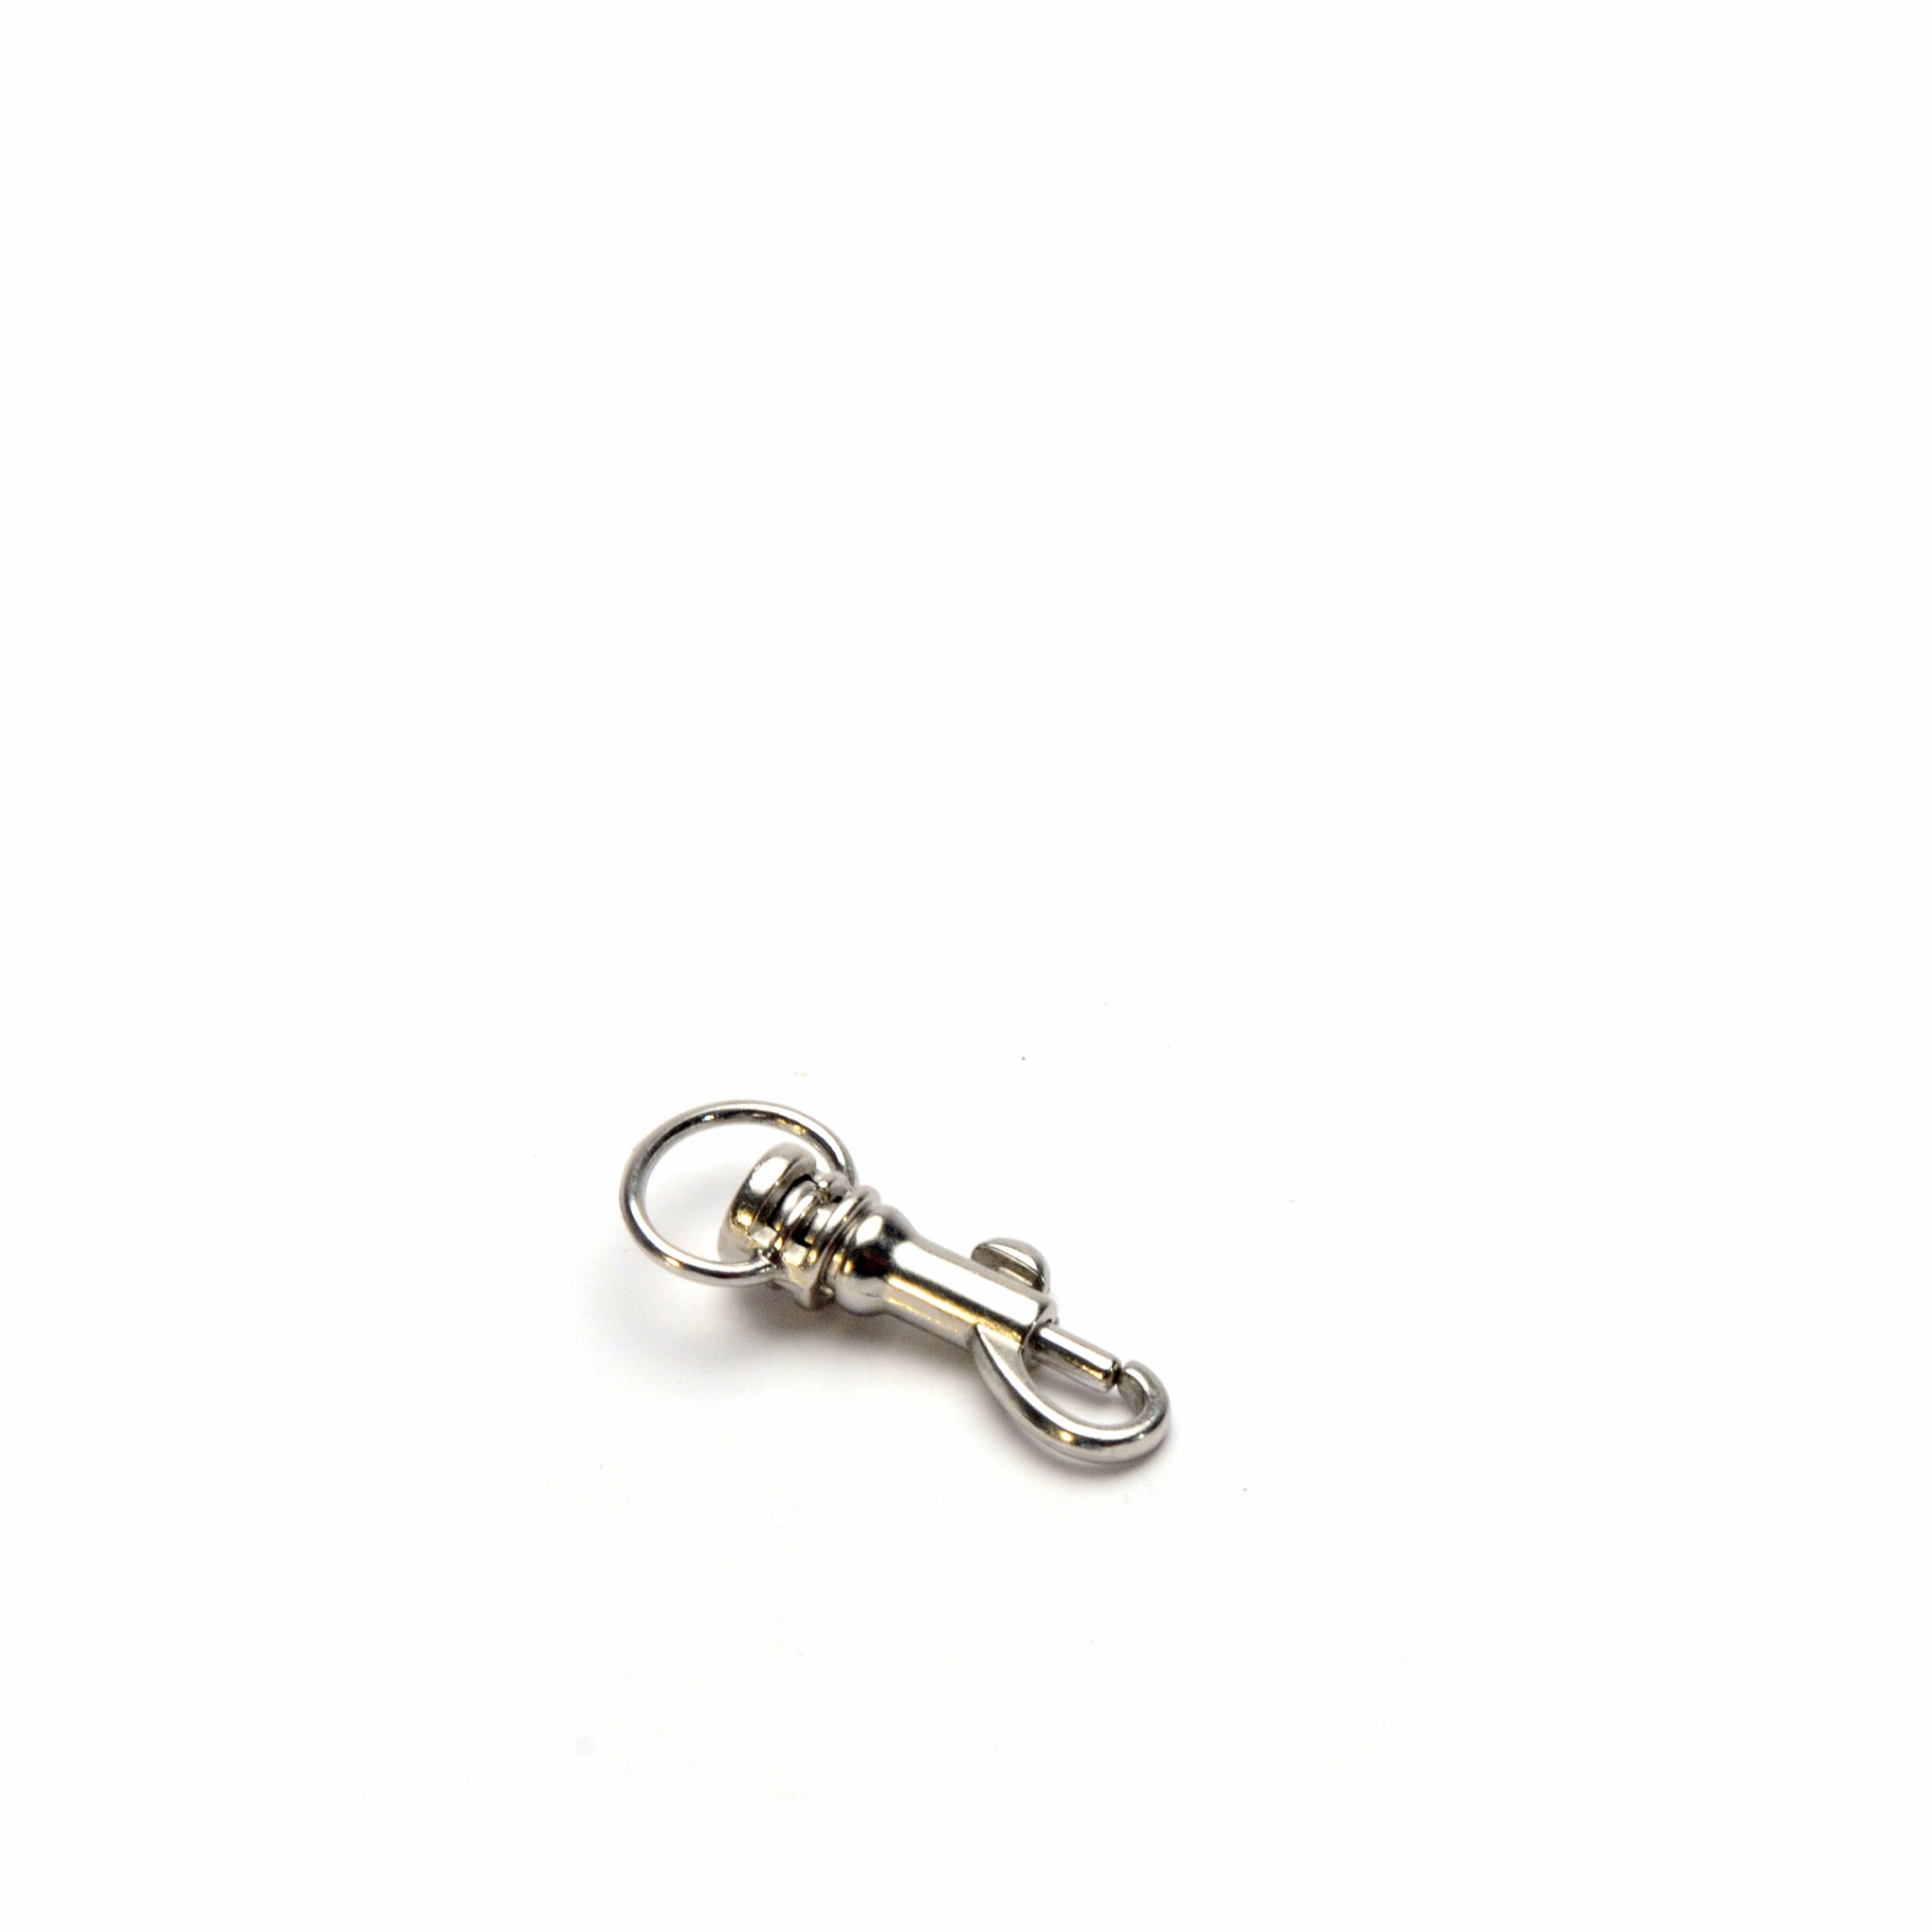 13mm Bag/All Purpose Swivel Clip - Nickel from Identity Leathercraft